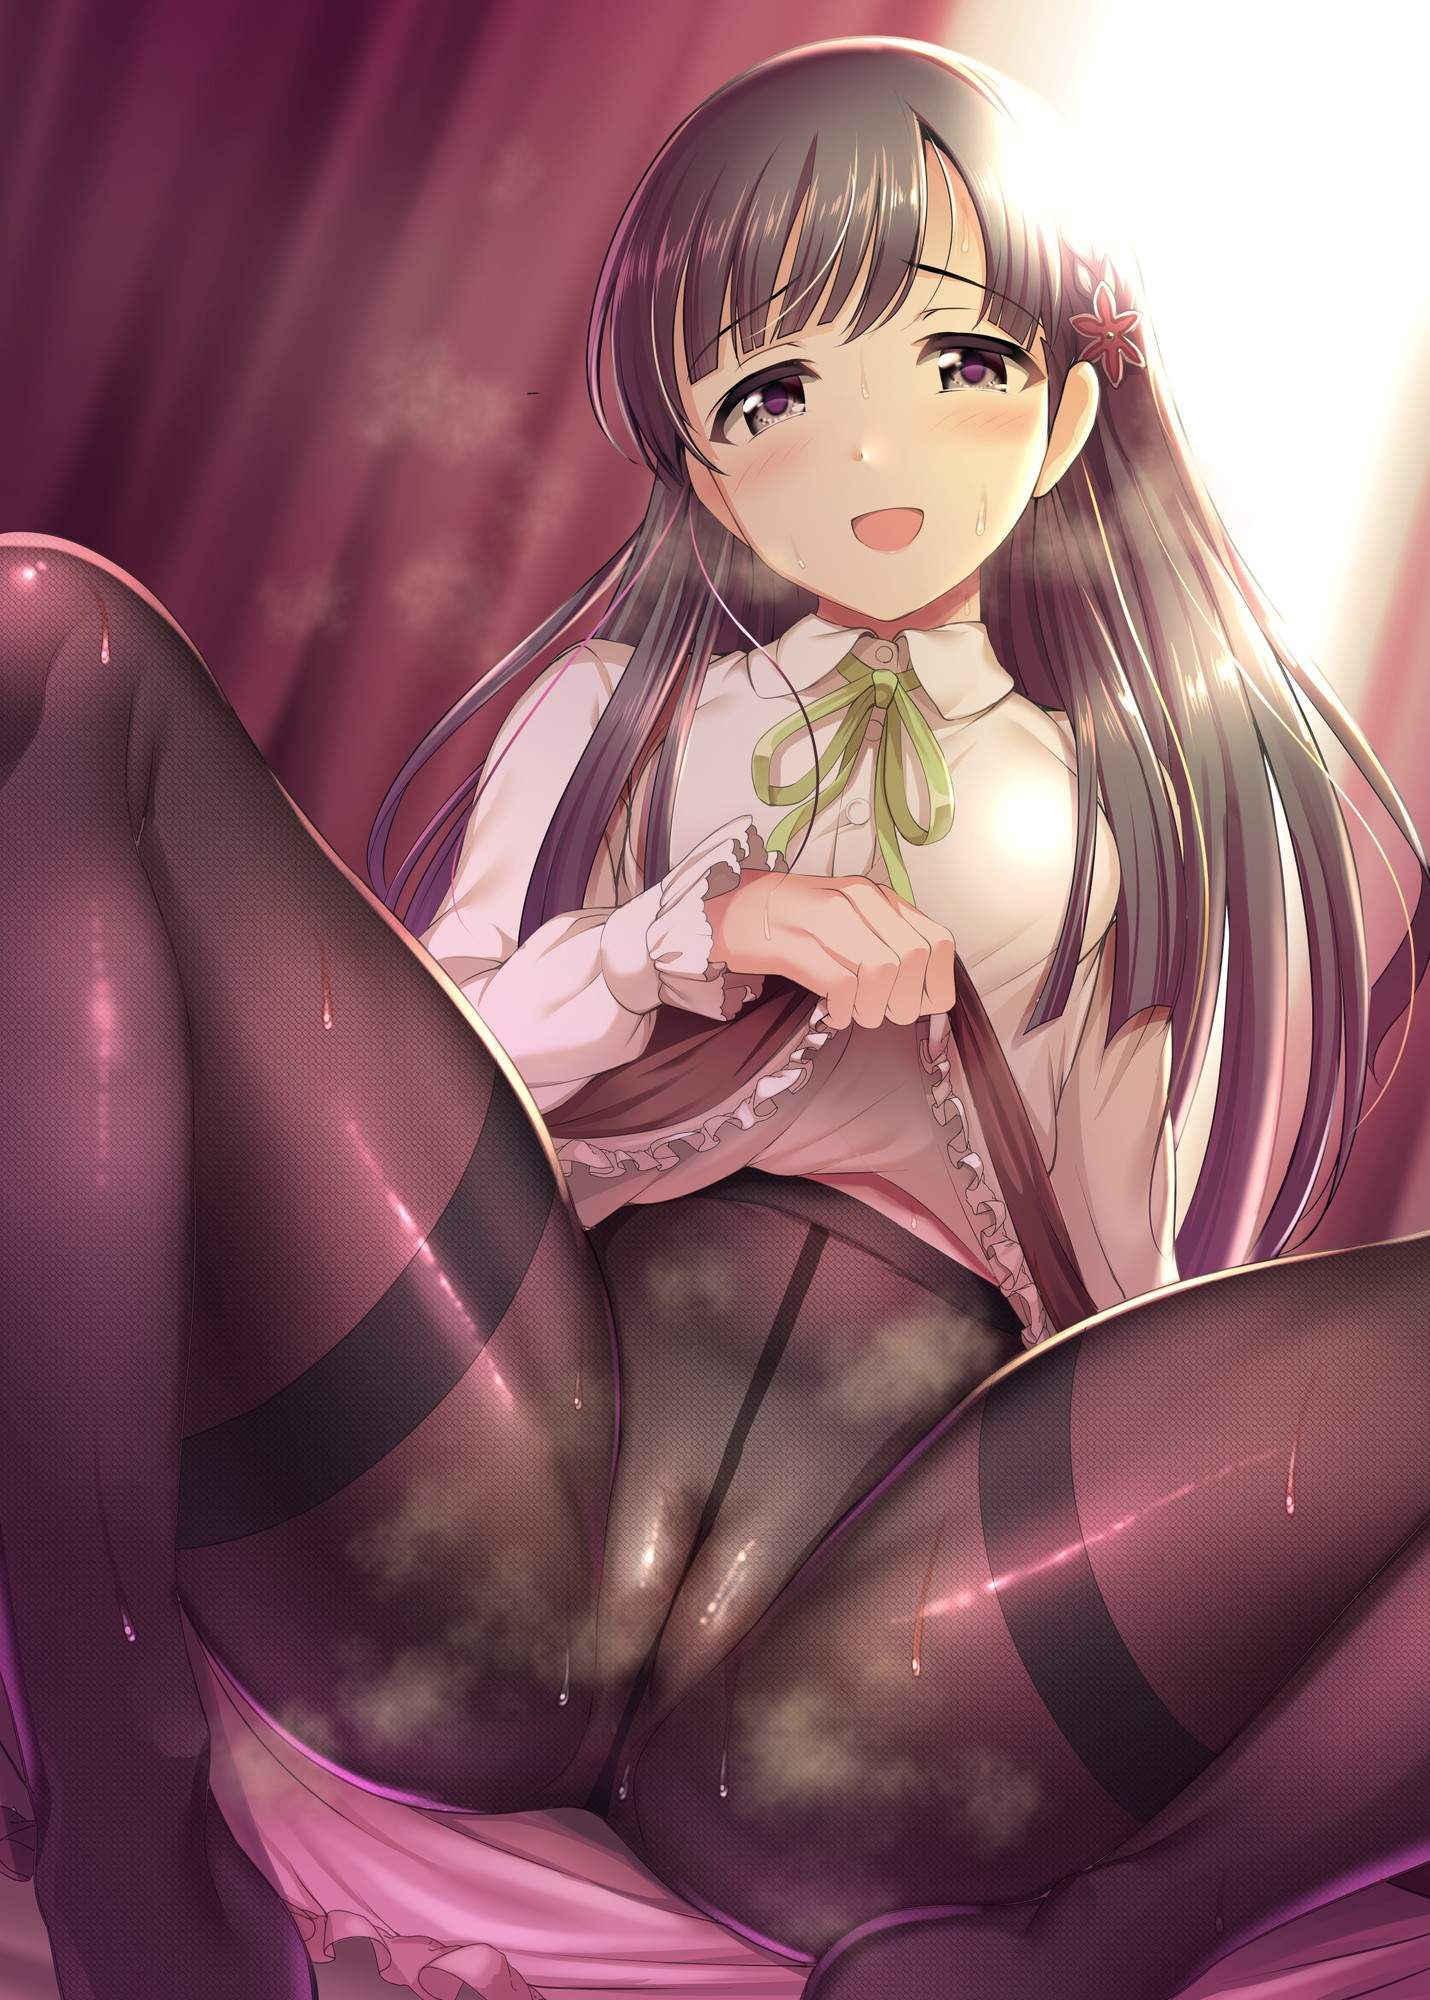 Please give me an erotic image of socks (stockings and socks)! 11